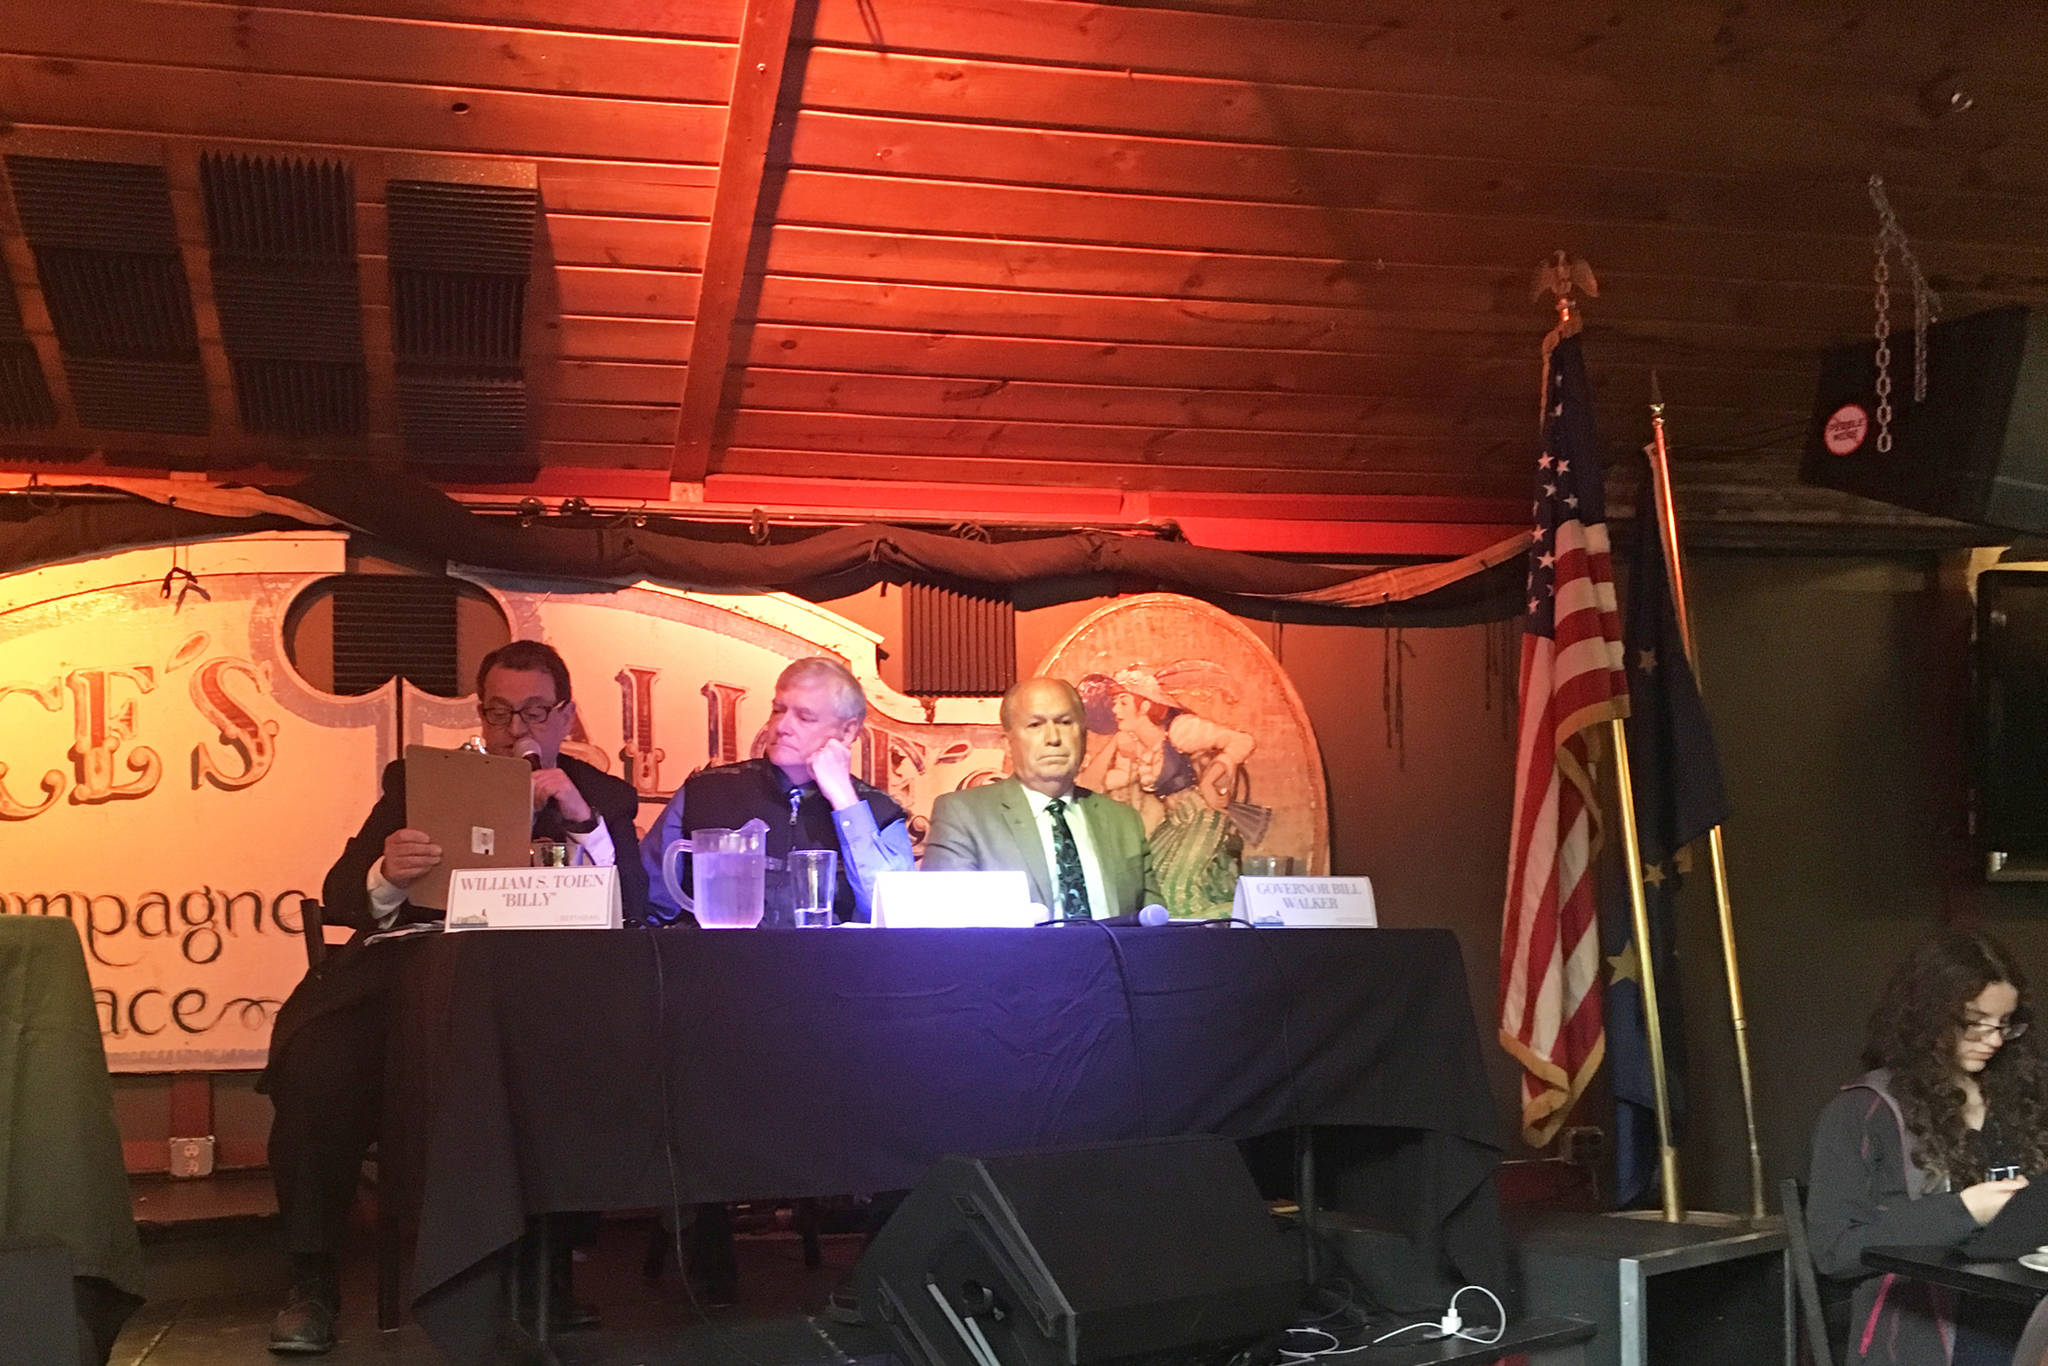 Chamber cancels candidate forums after GOP objects to venue; Seaton to hold own forum instead